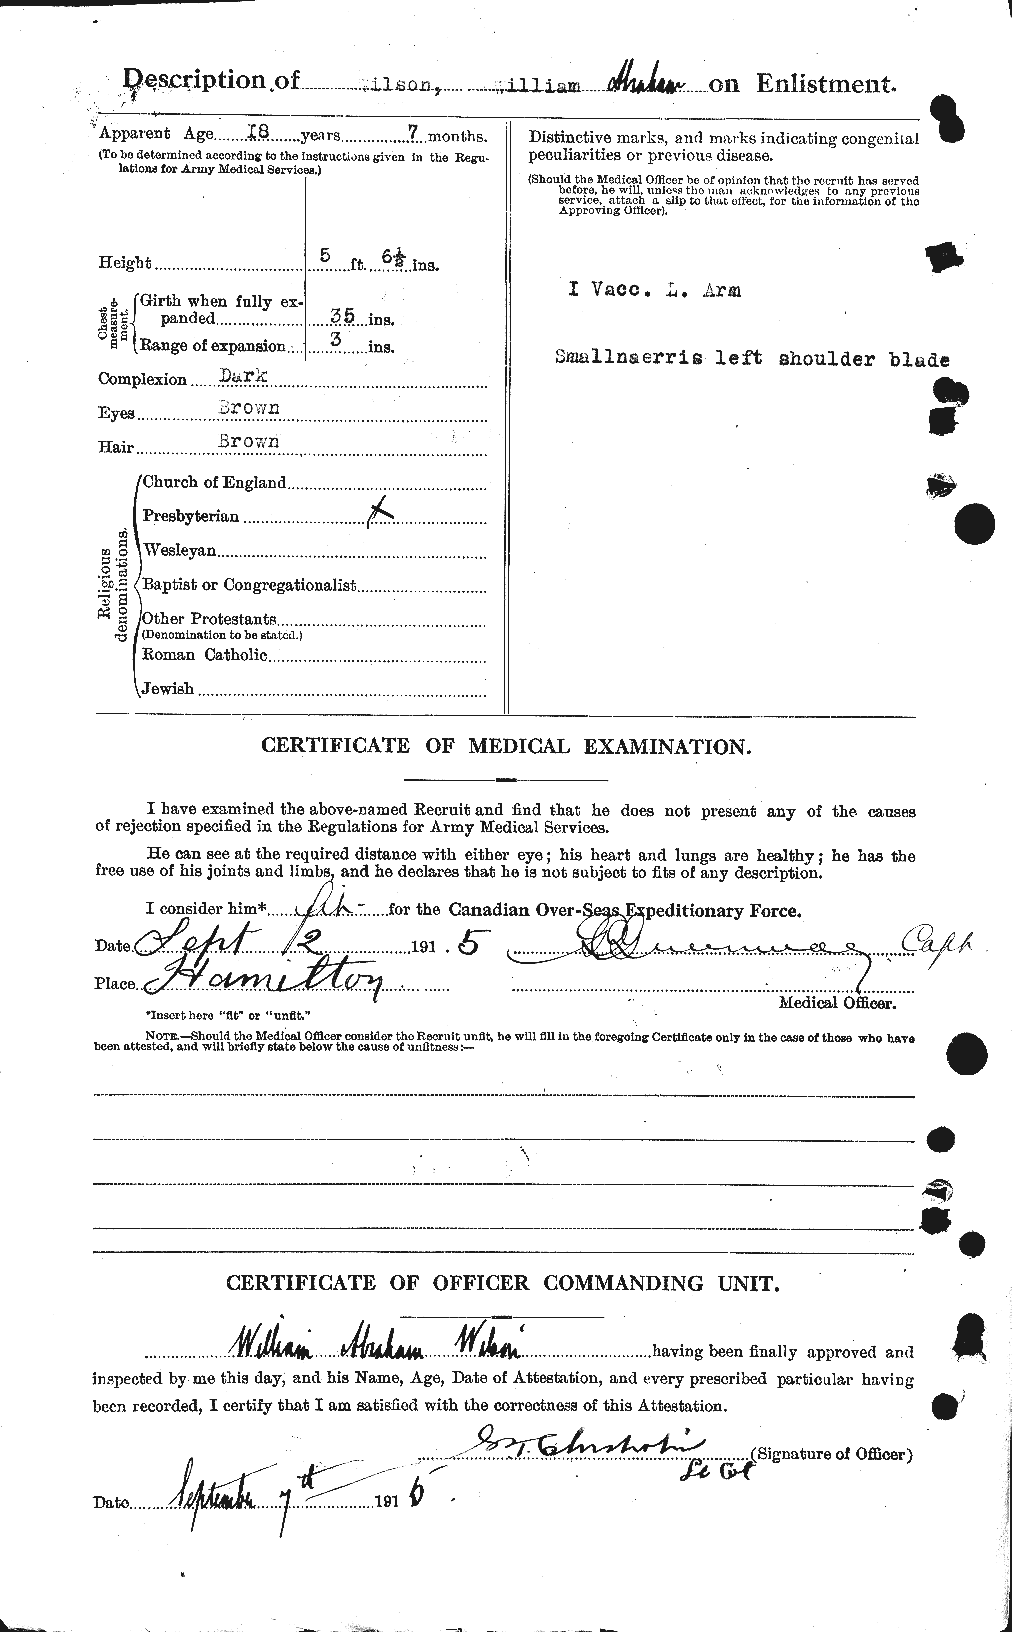 Personnel Records of the First World War - CEF 681921b